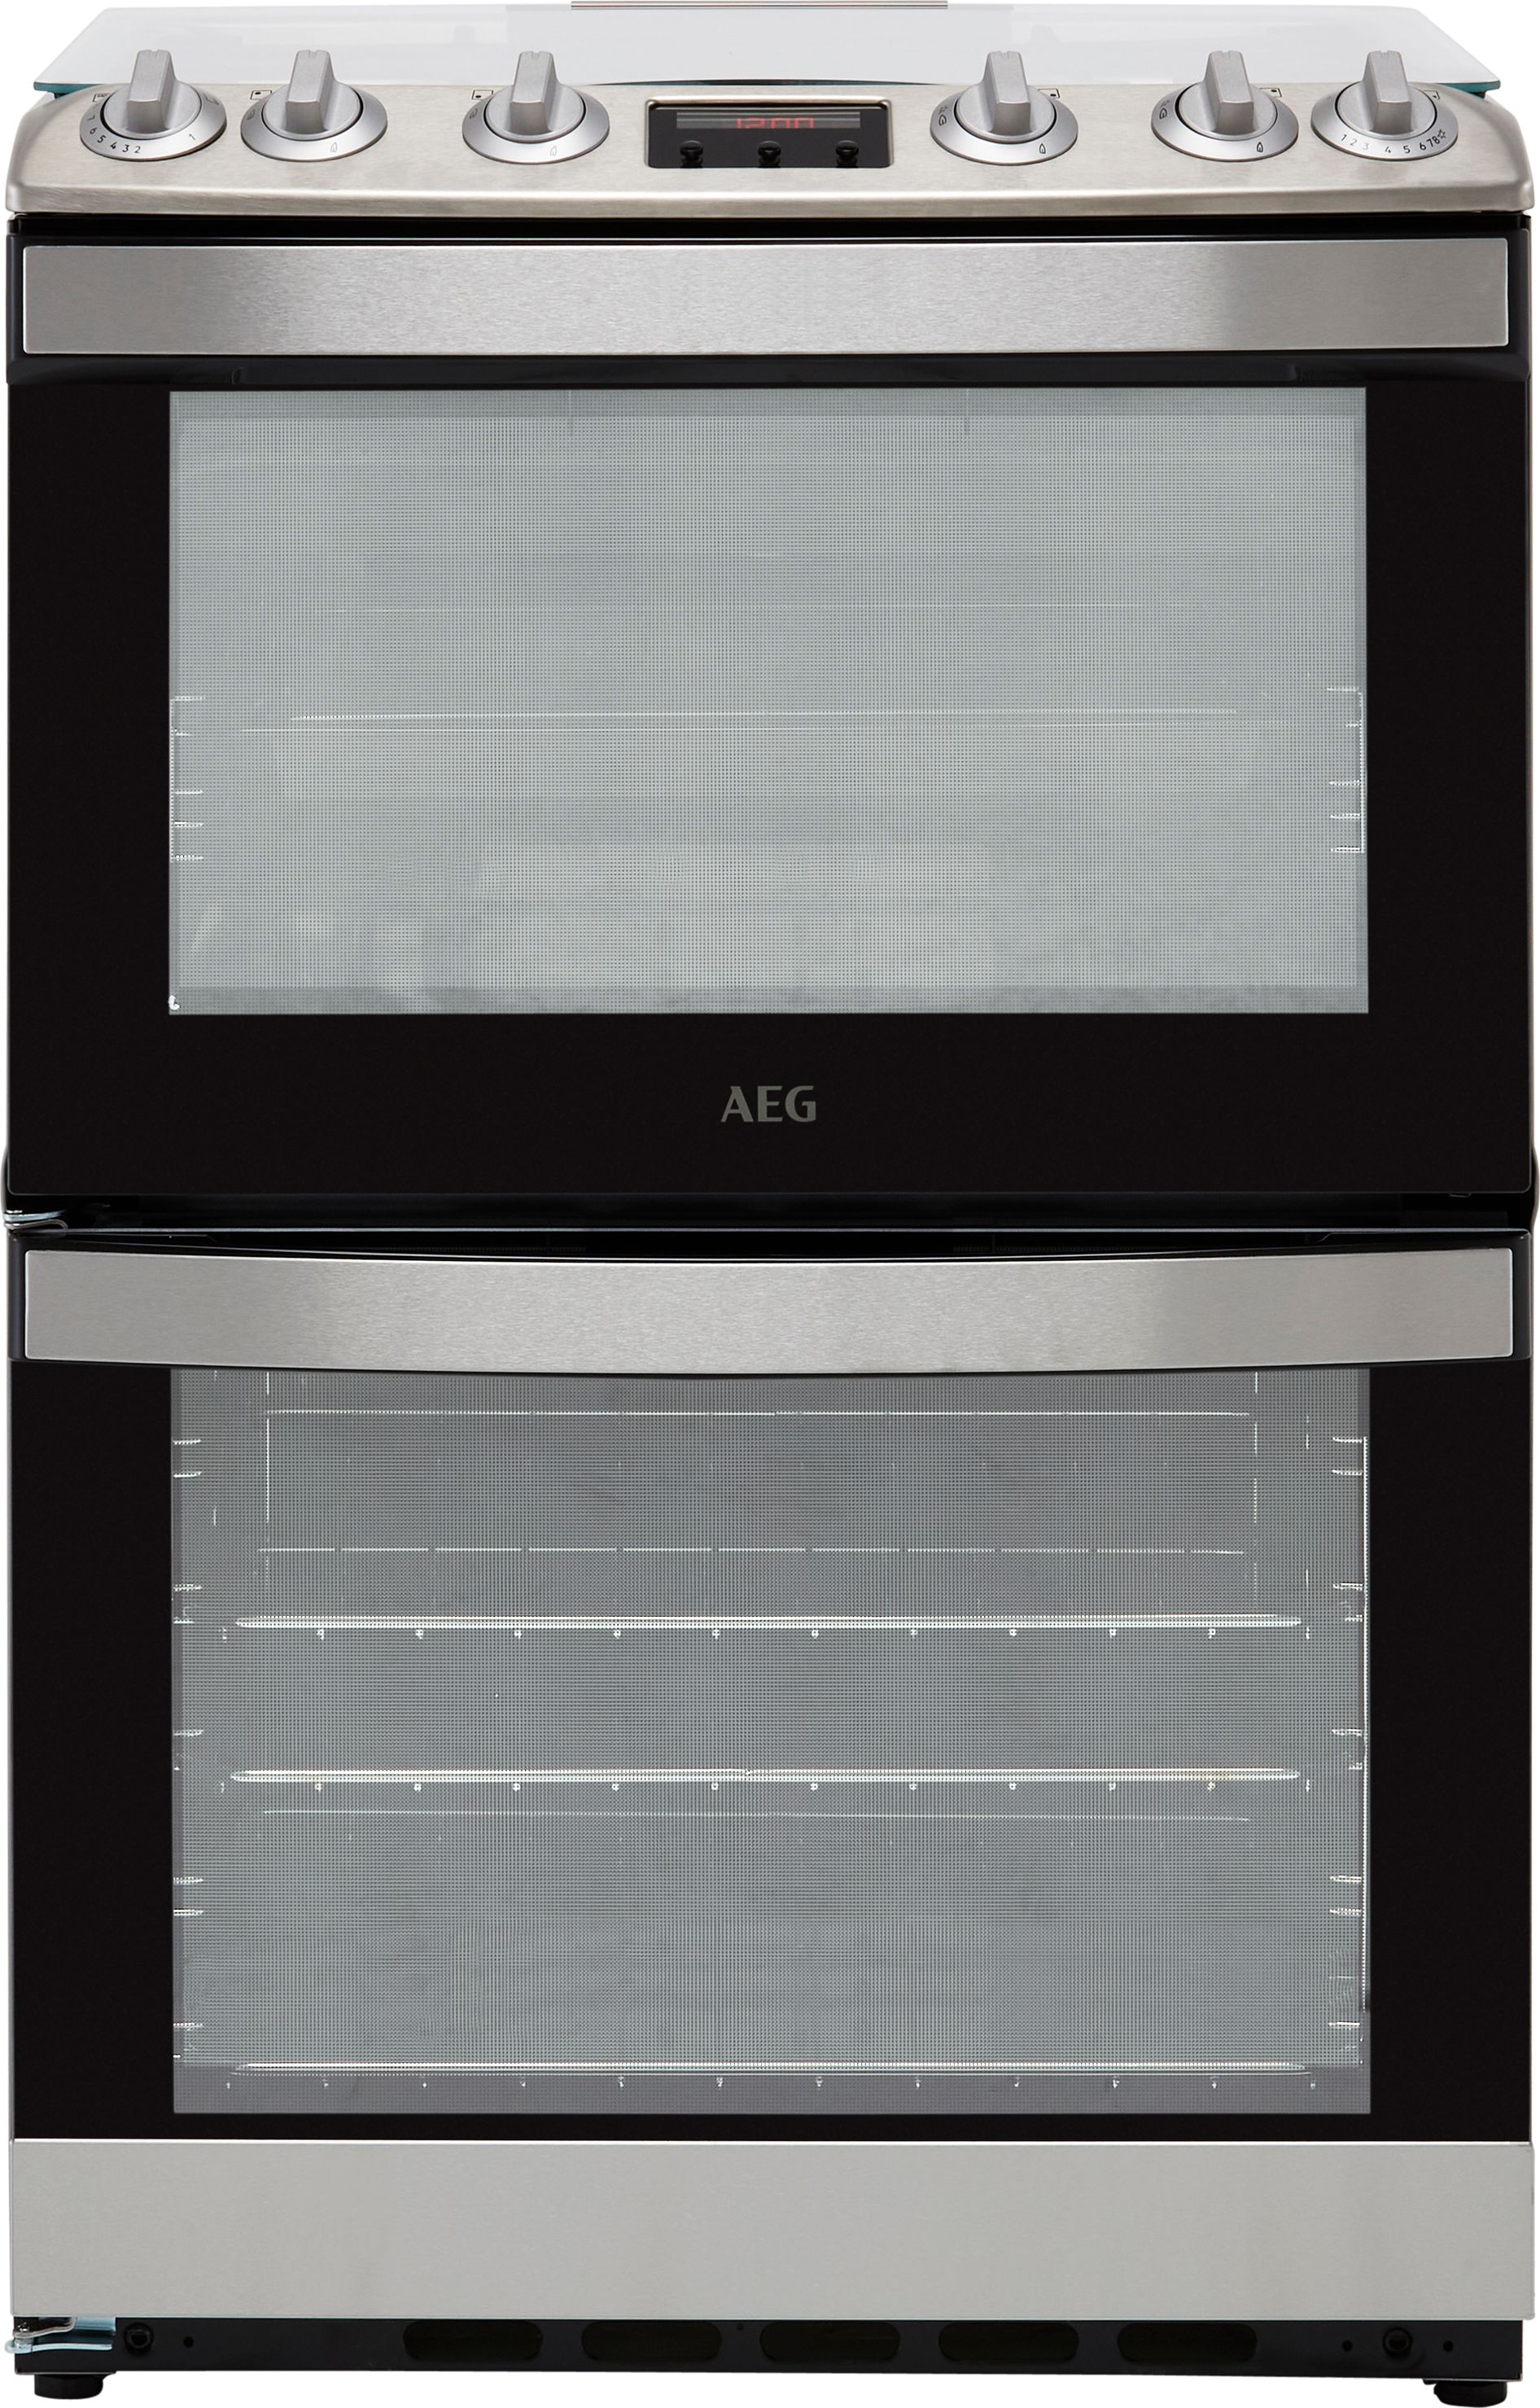 AEG CGB6130ACM Freestanding Gas Cooker with Variable Electric Grill - Stainless Steel - A/A Rated, Stainless Steel